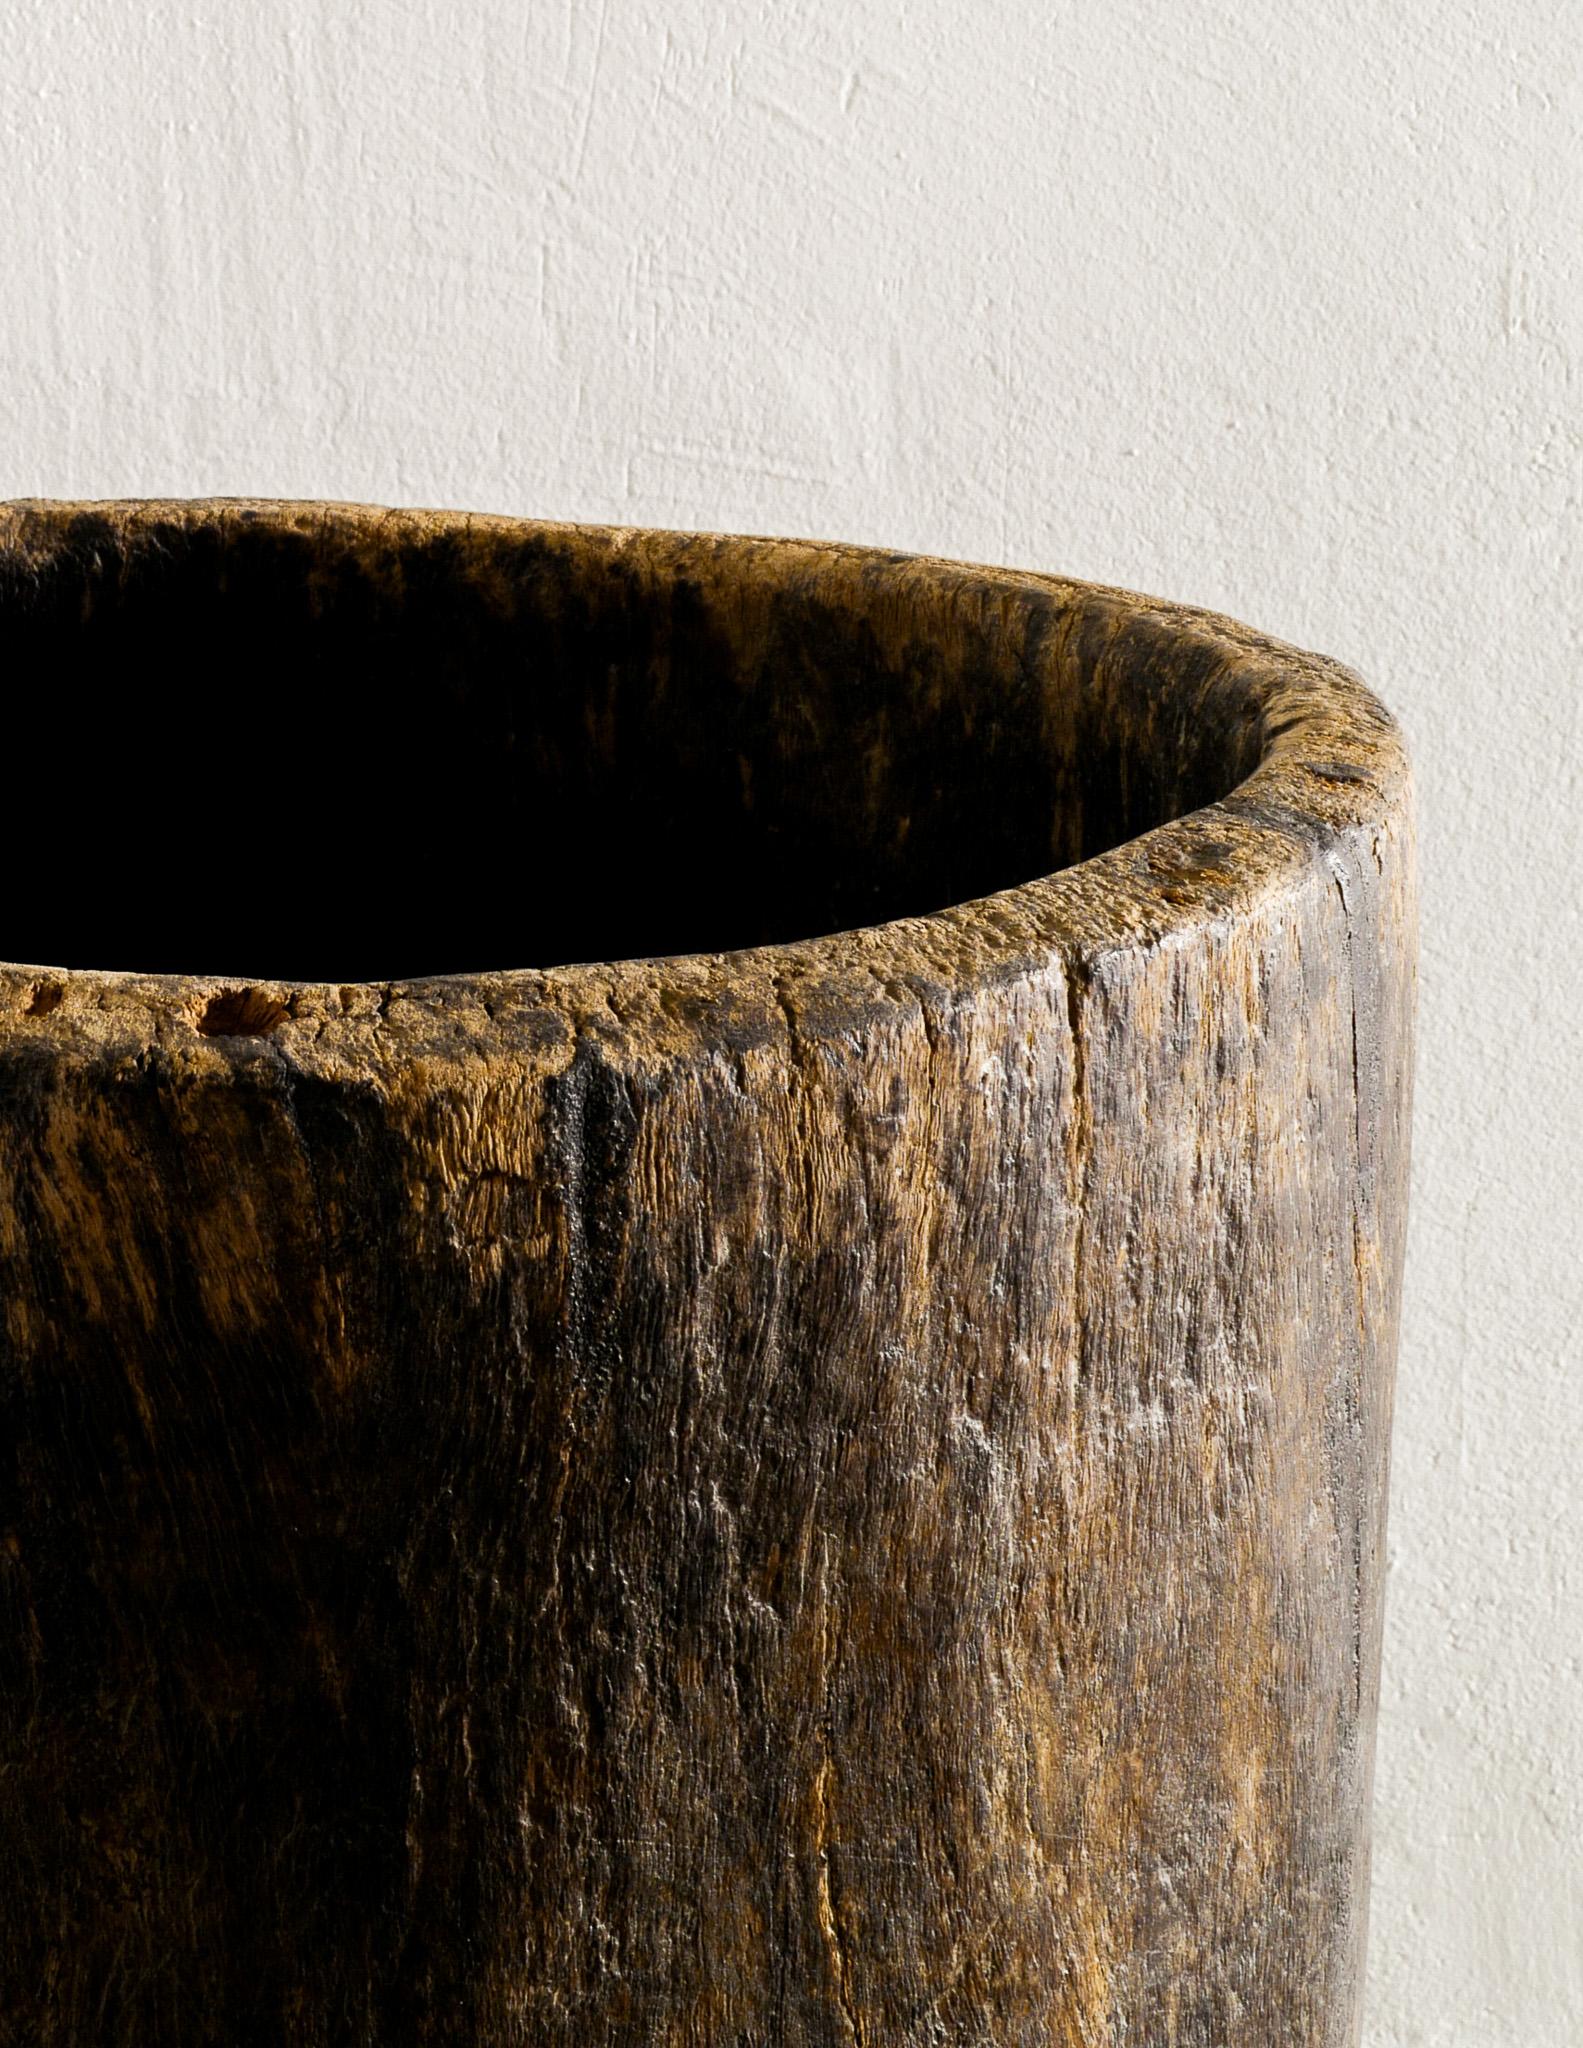 Late 20th Century Mid Century Naga Wooden Planter in Teak and Wabi Sabi Style Produced in India